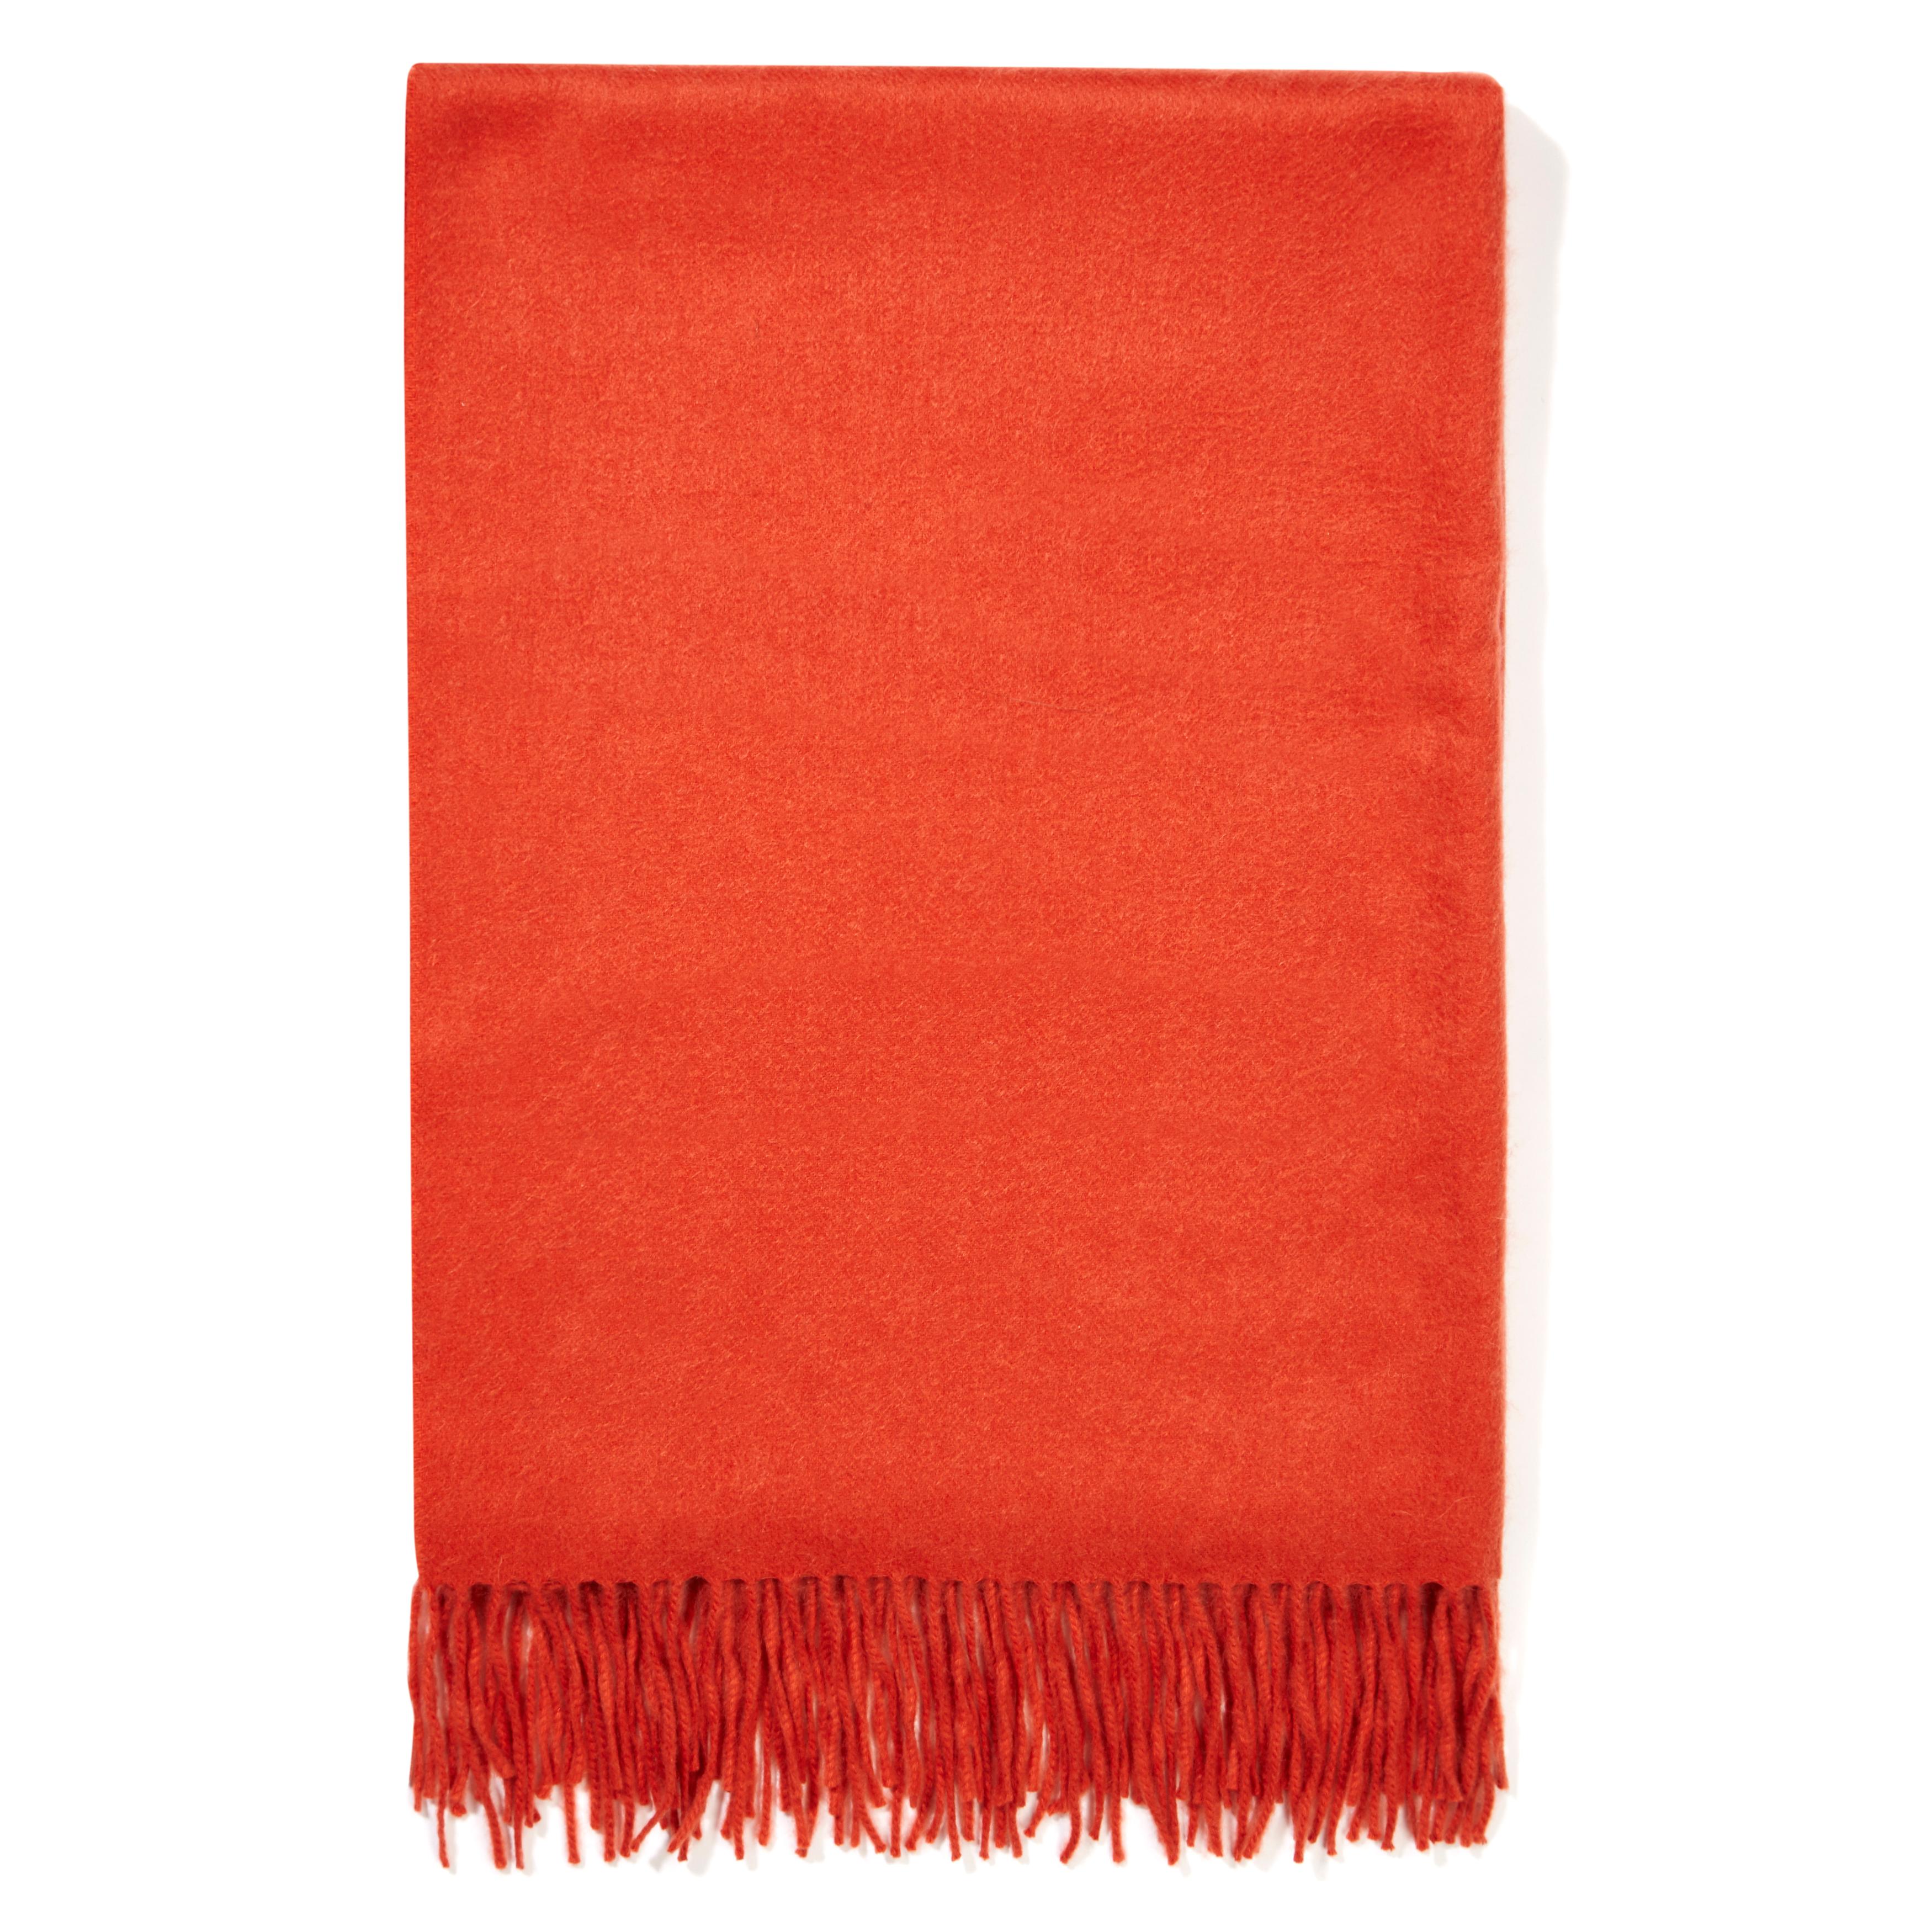 The perfect Christmas gift for someone special.  
Verheyen London’s shawl is spun from the finest Scottish woven cashmere.  Its warmth envelopes you with luxury, perfect for travel and comfort wherever you are.

PRODUCT DETAILS
Verheyen London